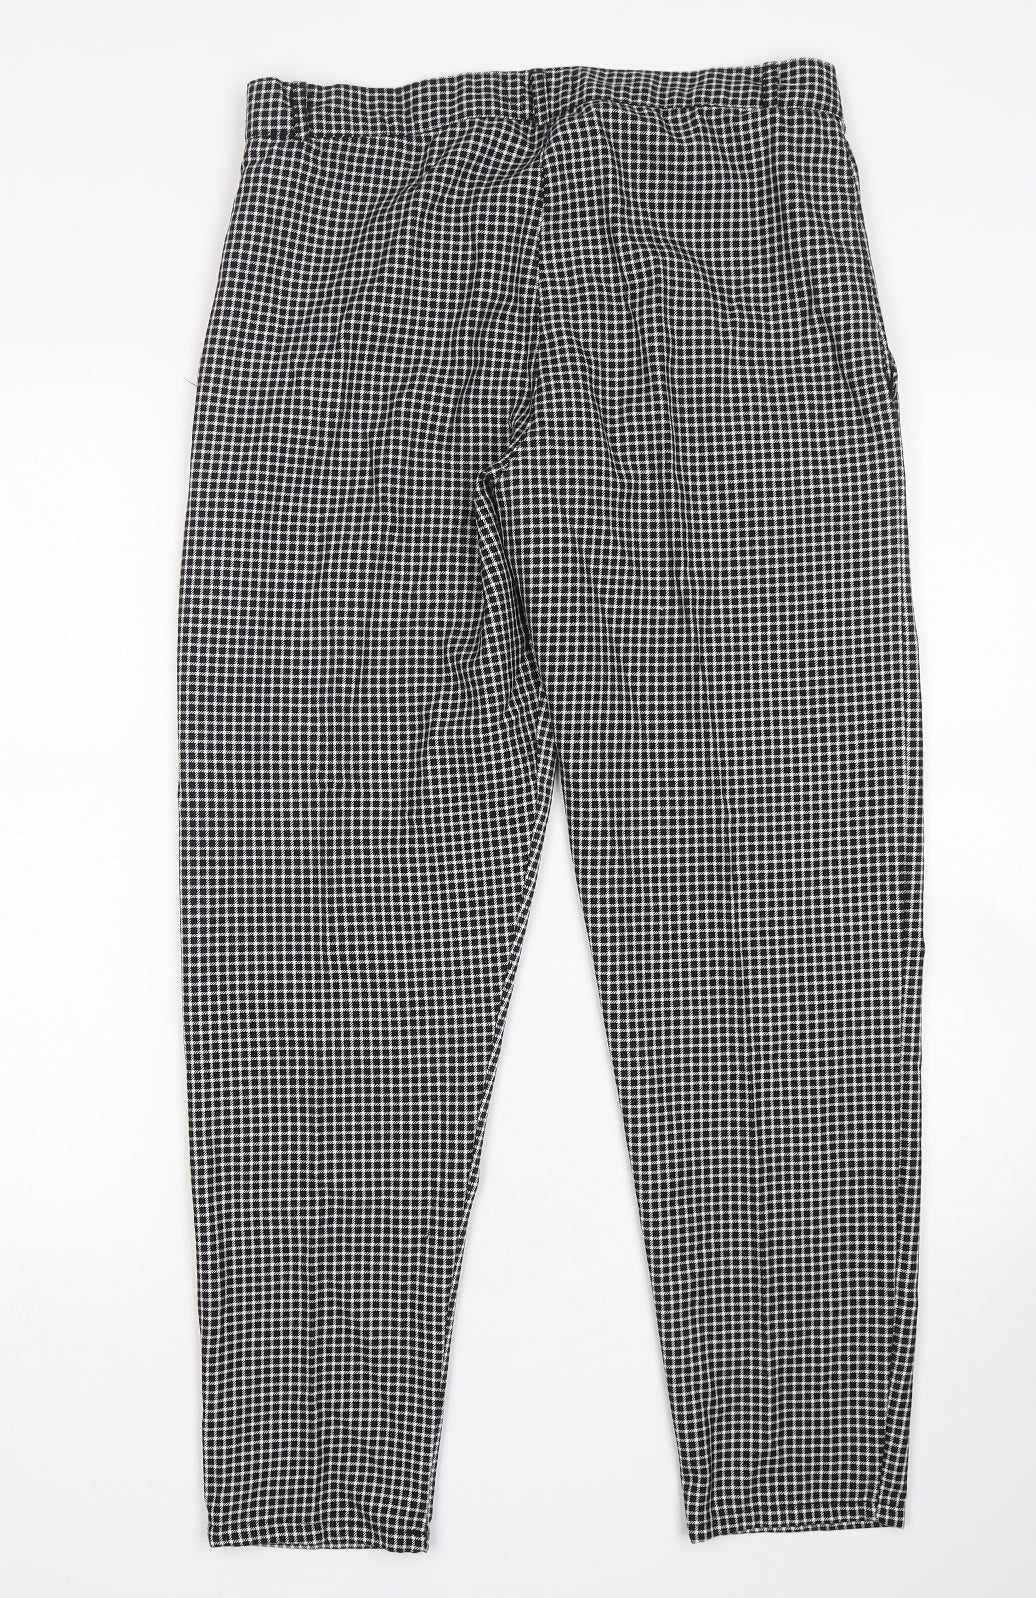 BoohooMAN Mens Multicoloured Check Polyester Trousers  Size M L29 in Regular Button